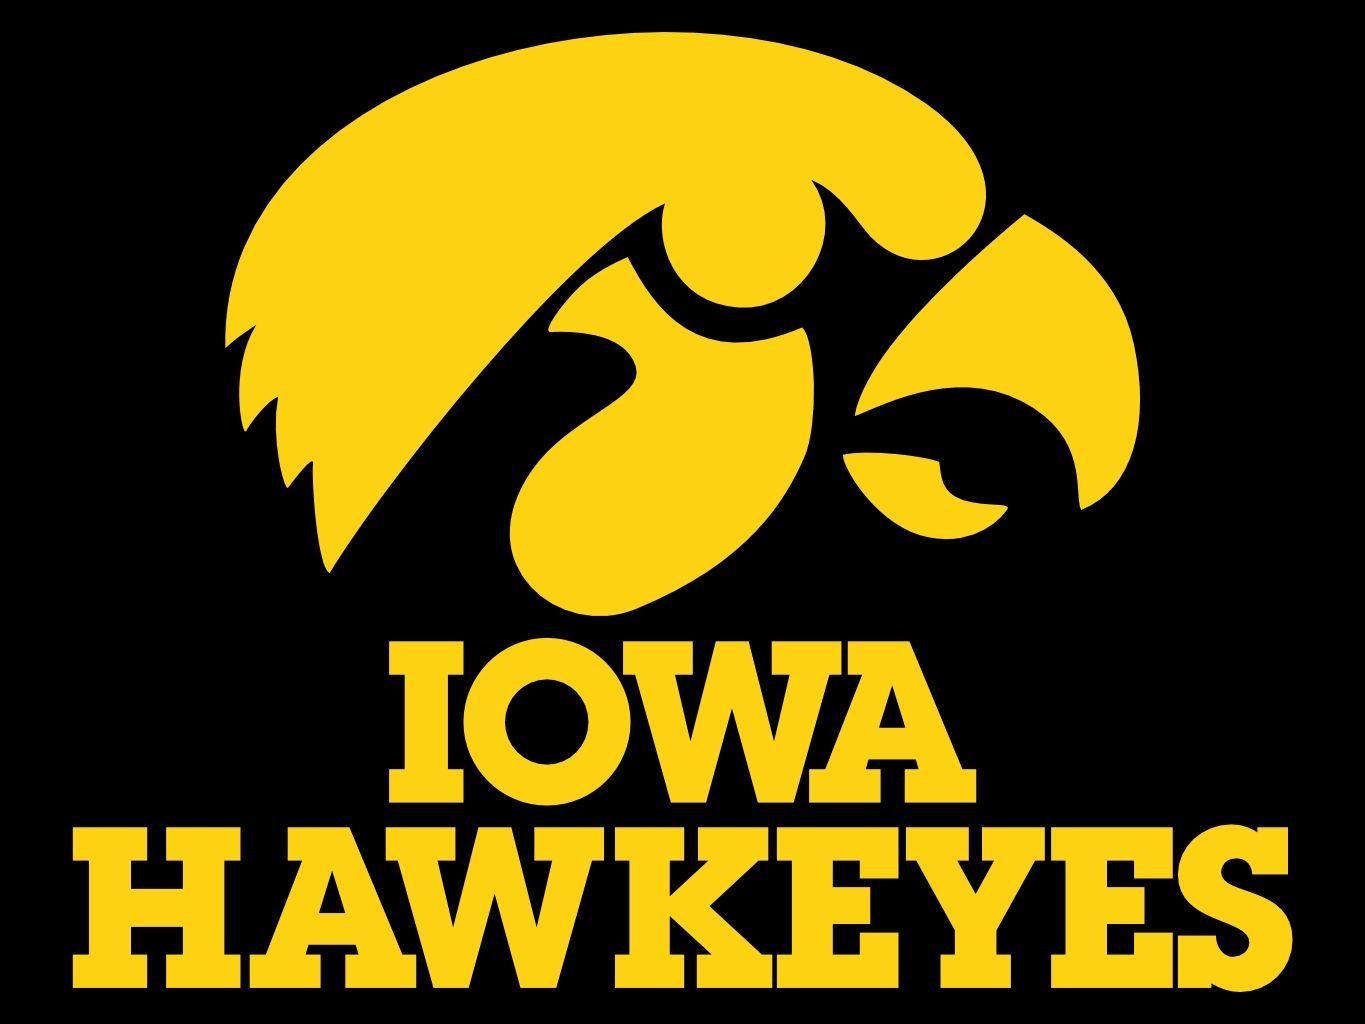 Countdown to 2016 #Hawkeyes